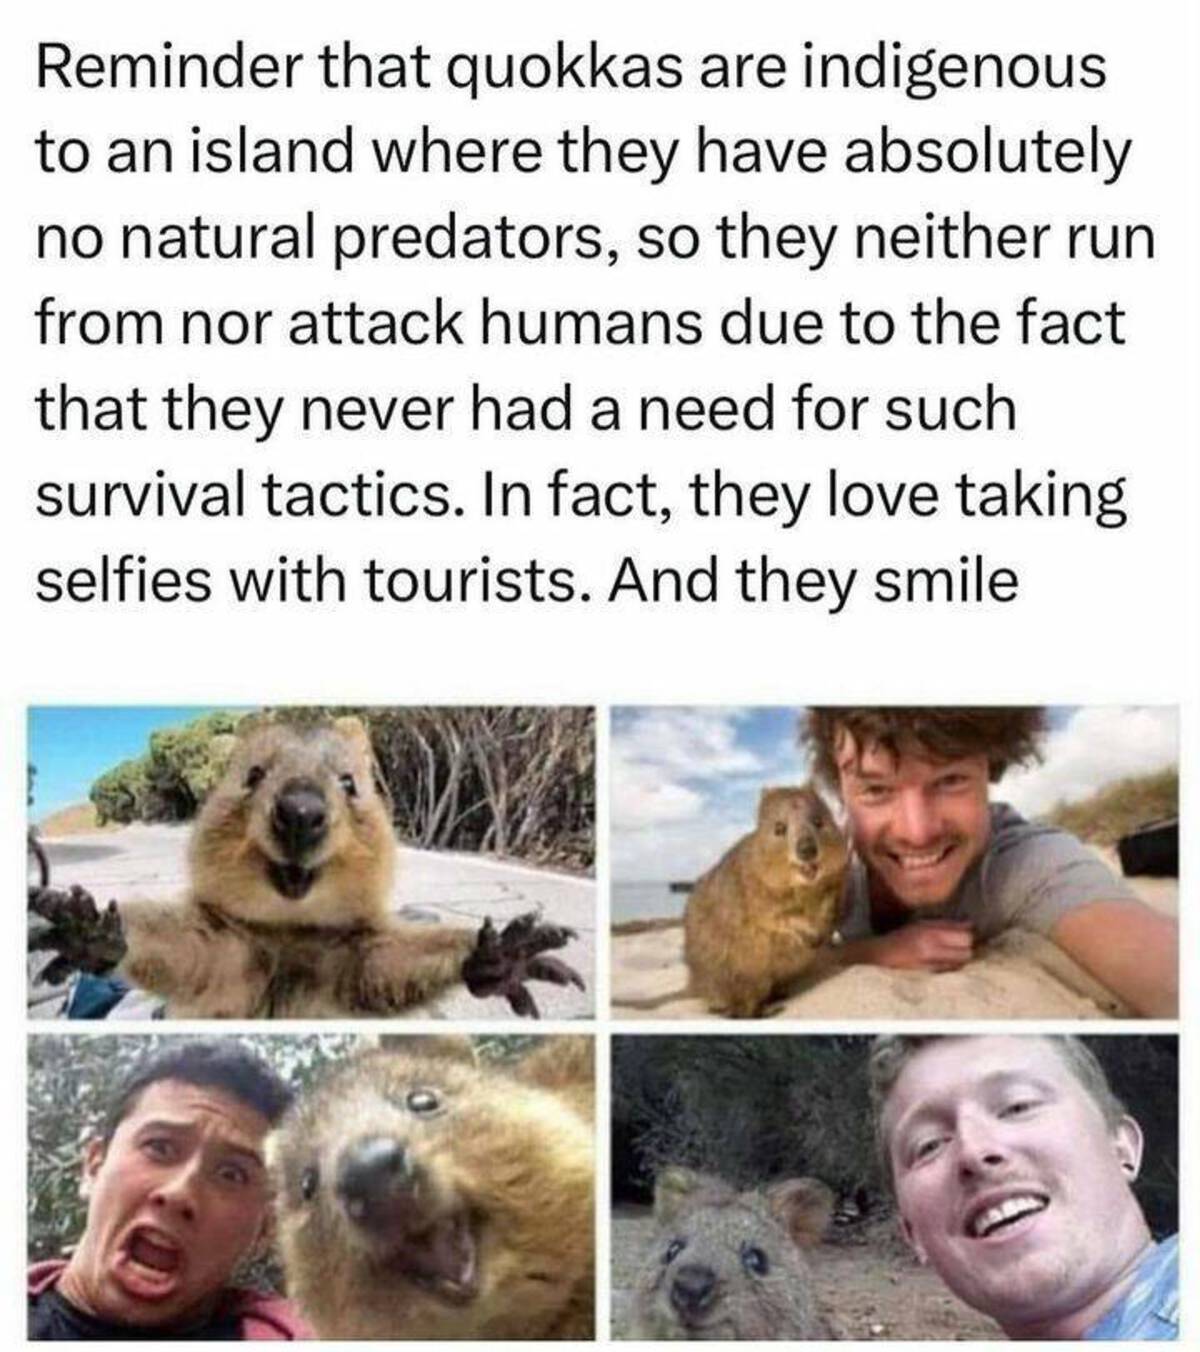 island with no natural predators - Reminder that quokkas are indigenous to an island where they have absolutely no natural predators, so they neither run from nor attack humans due to the fact that they never had a need for such survival tactics. In fact,